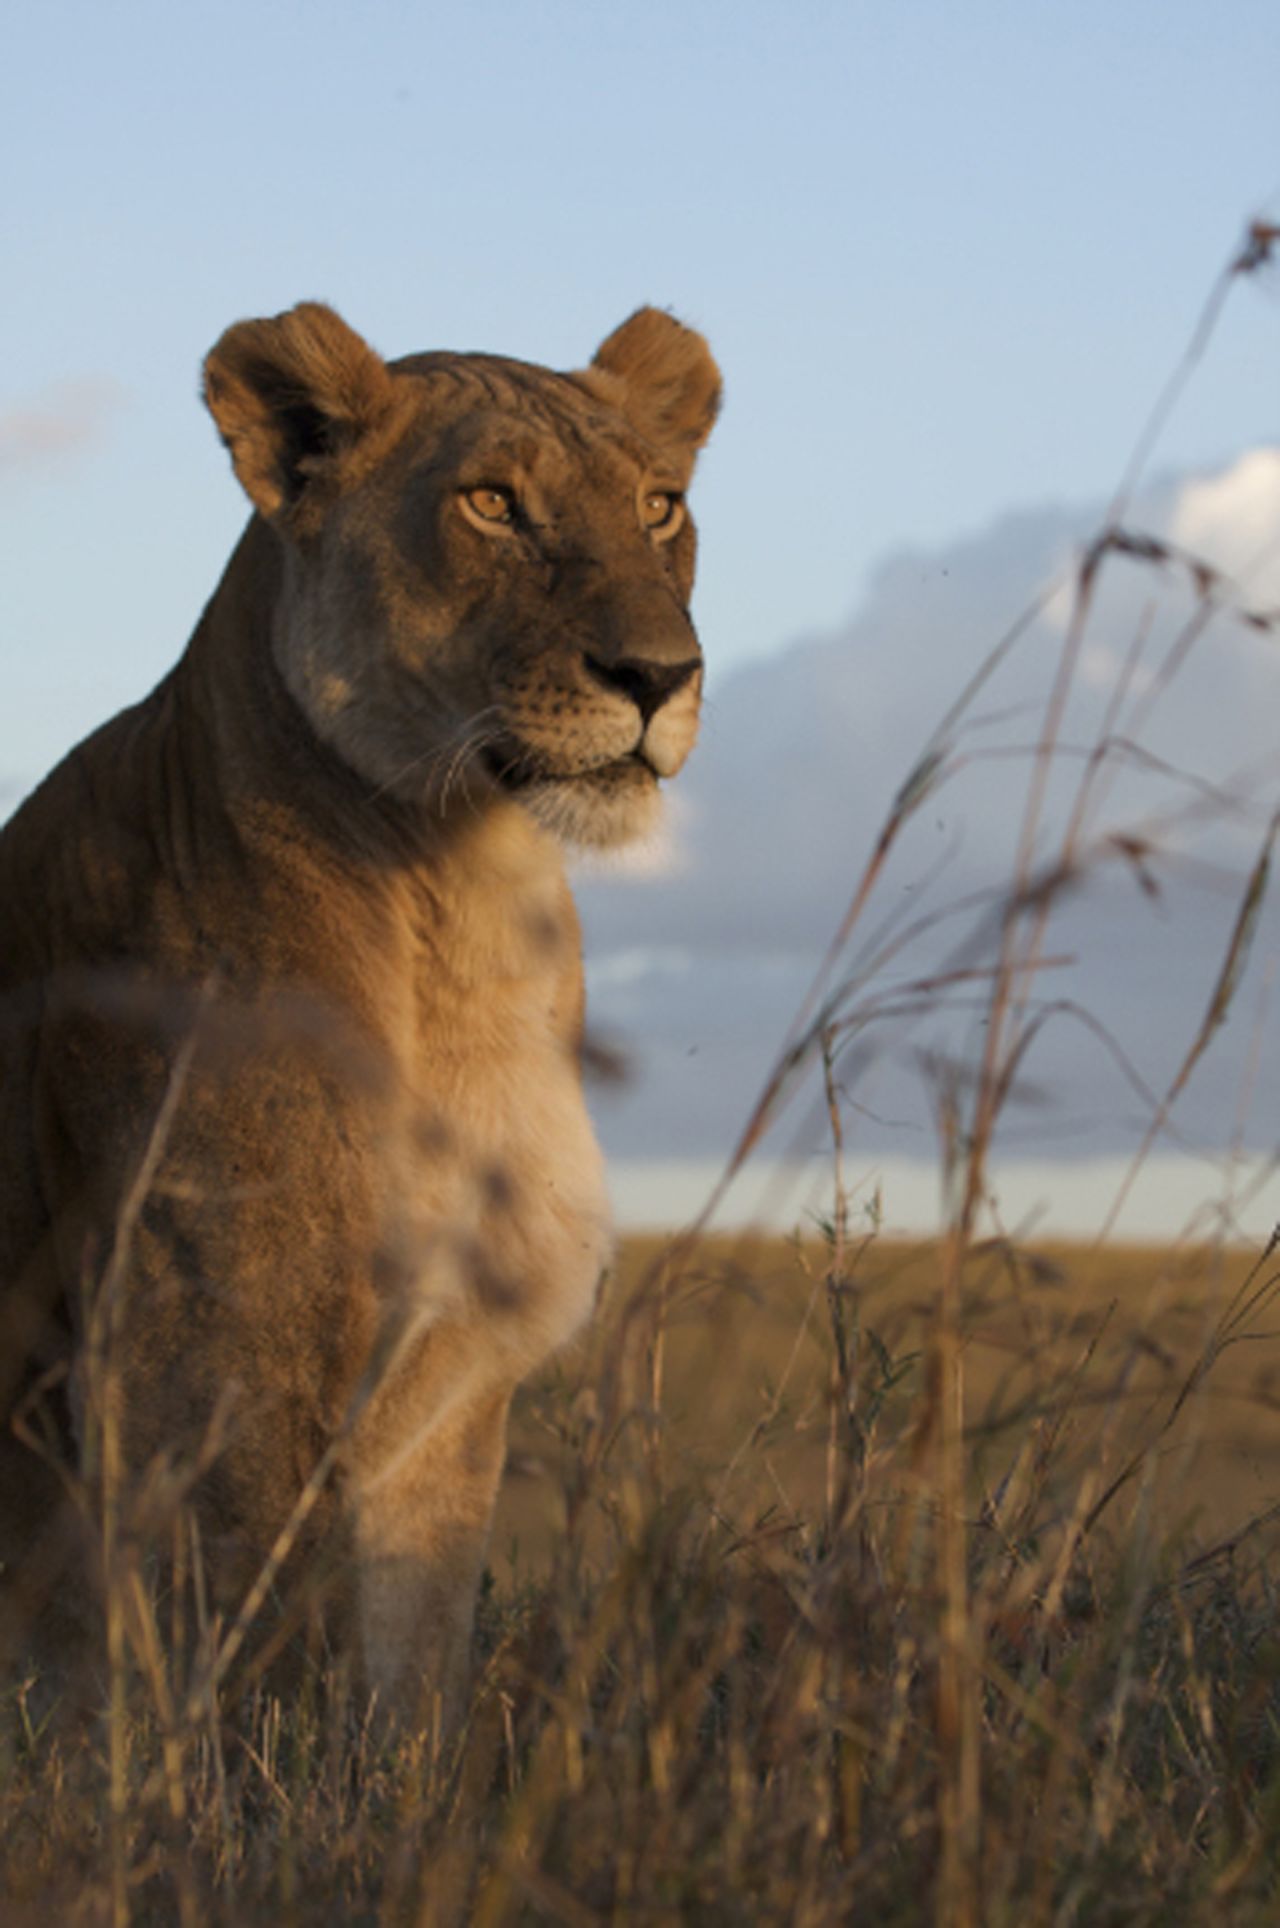 One of the lionesses tracked by the filmmakers during production. Highly social animals, lions live in prides that can include from one to three male lions and from three to 30 females, as well as their young. Lionesses are responsible for the majority of kills to feed the group.